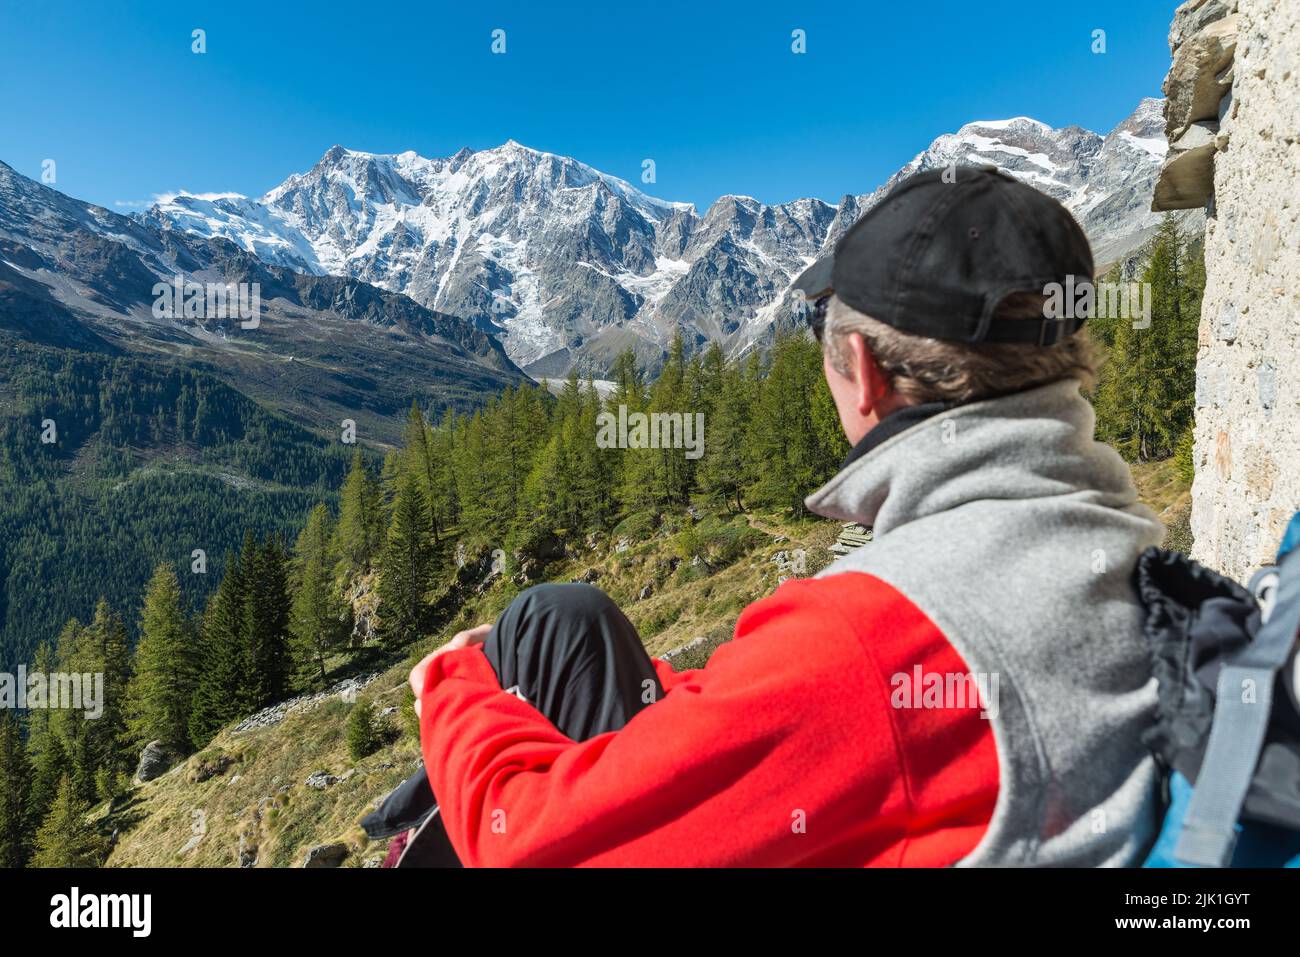 Italian Alps and hiker resting while admiring the view. Macugnaga, Italy.  Concept of hiking, sports and outdoor activities Stock Photo